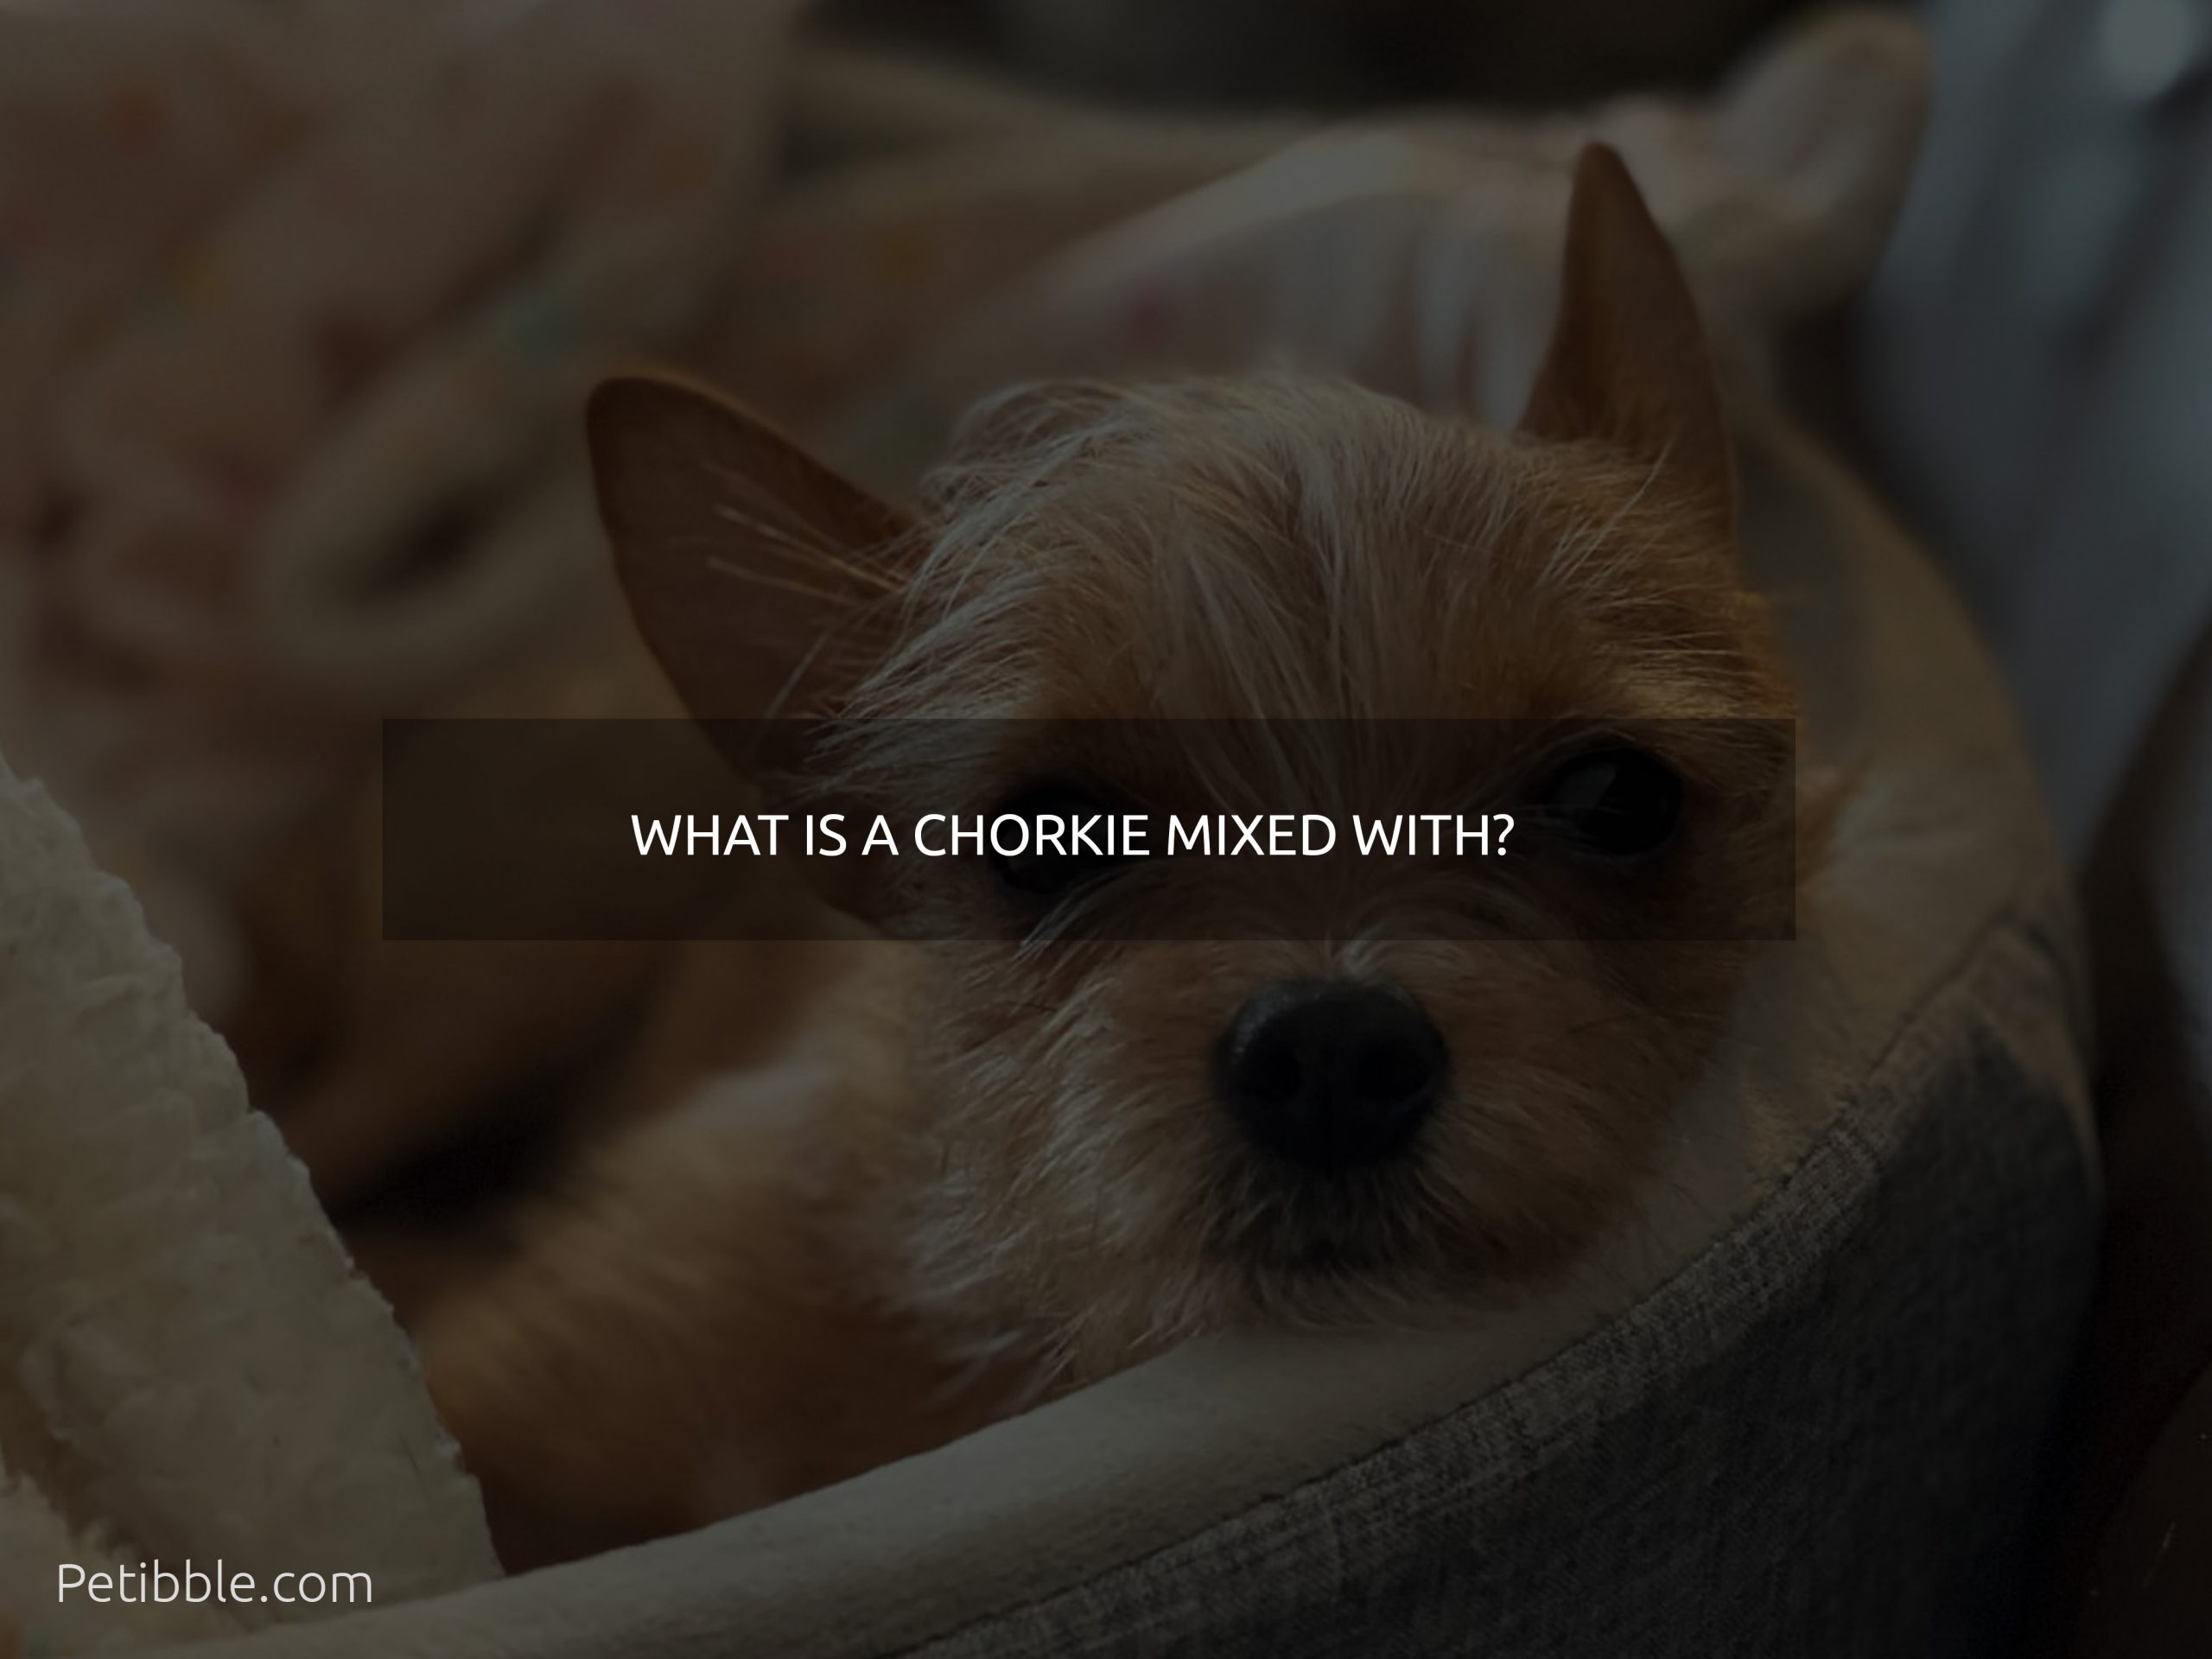 What is a chorkie mixed with?